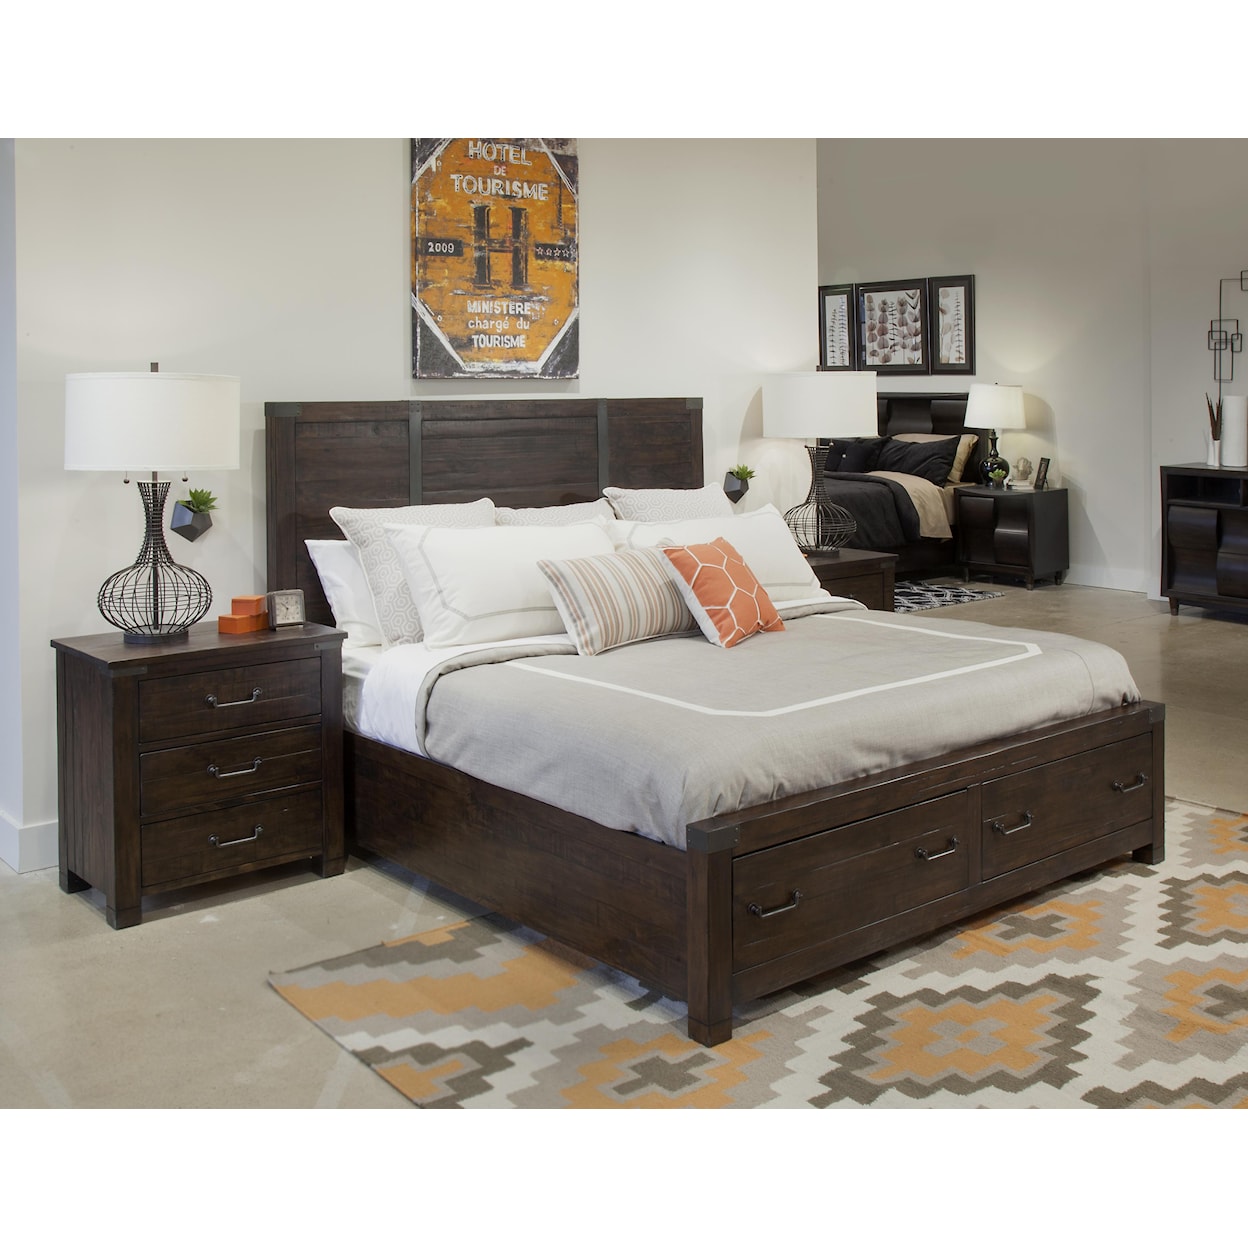 Belfort Select Pine Hill Bedroom King Panel Bed with Storage Footboard